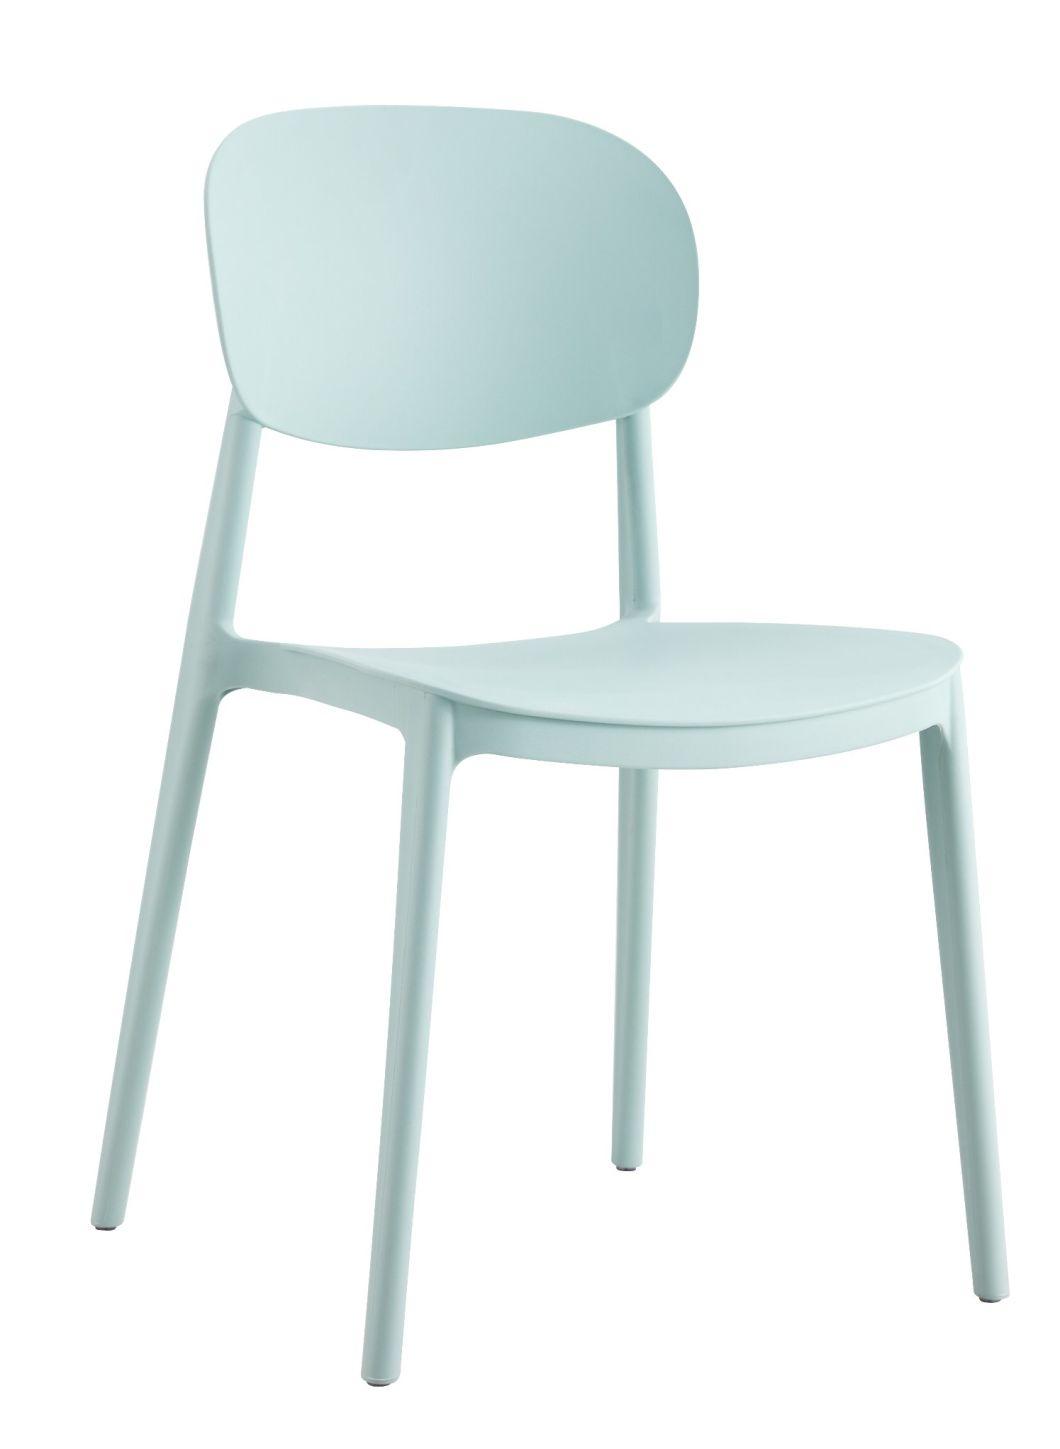 Wholesale Dhf Modern Plastic Chair Dining, Cafe Furniture Chair for Outdoor